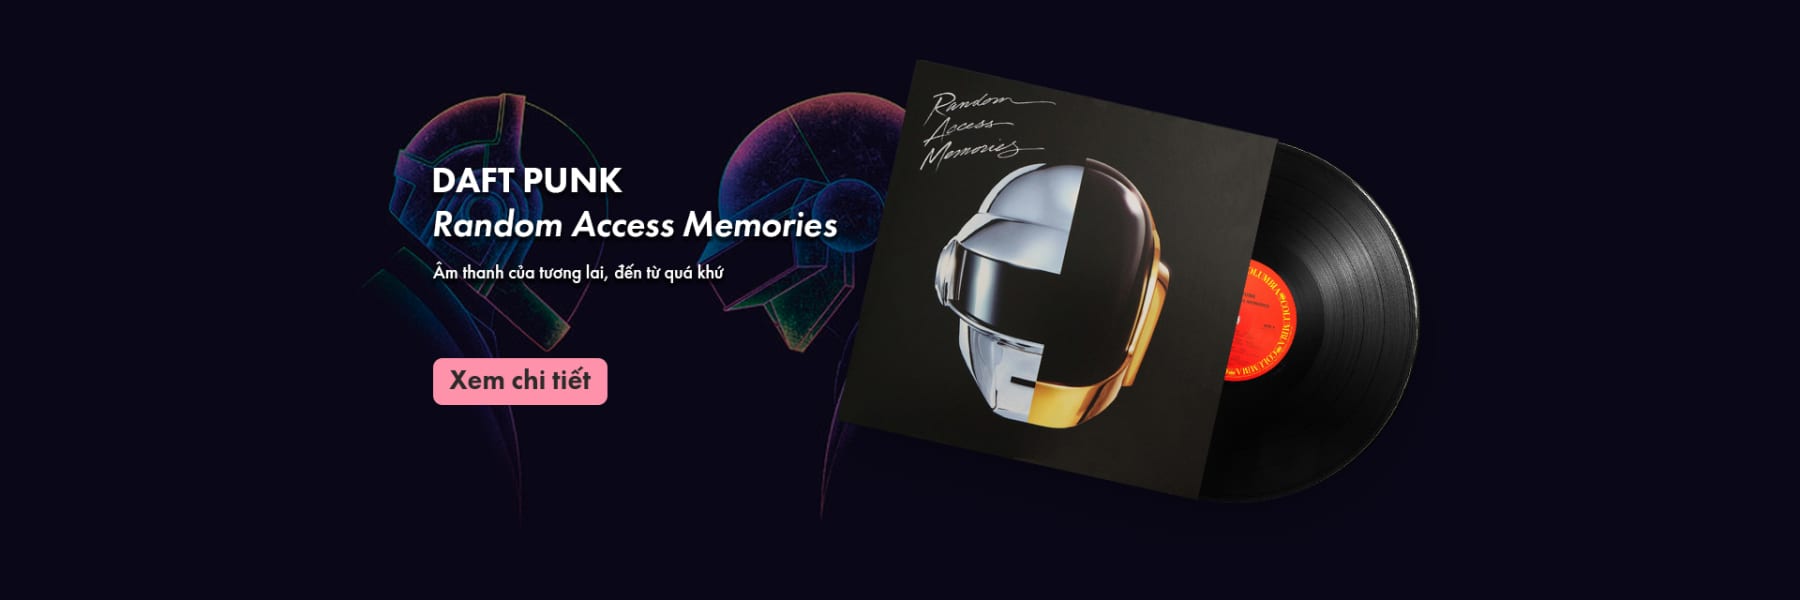 https://vocrecords.vn/product/on-the-run/new-this-week/daft-punk-random-access-memory/